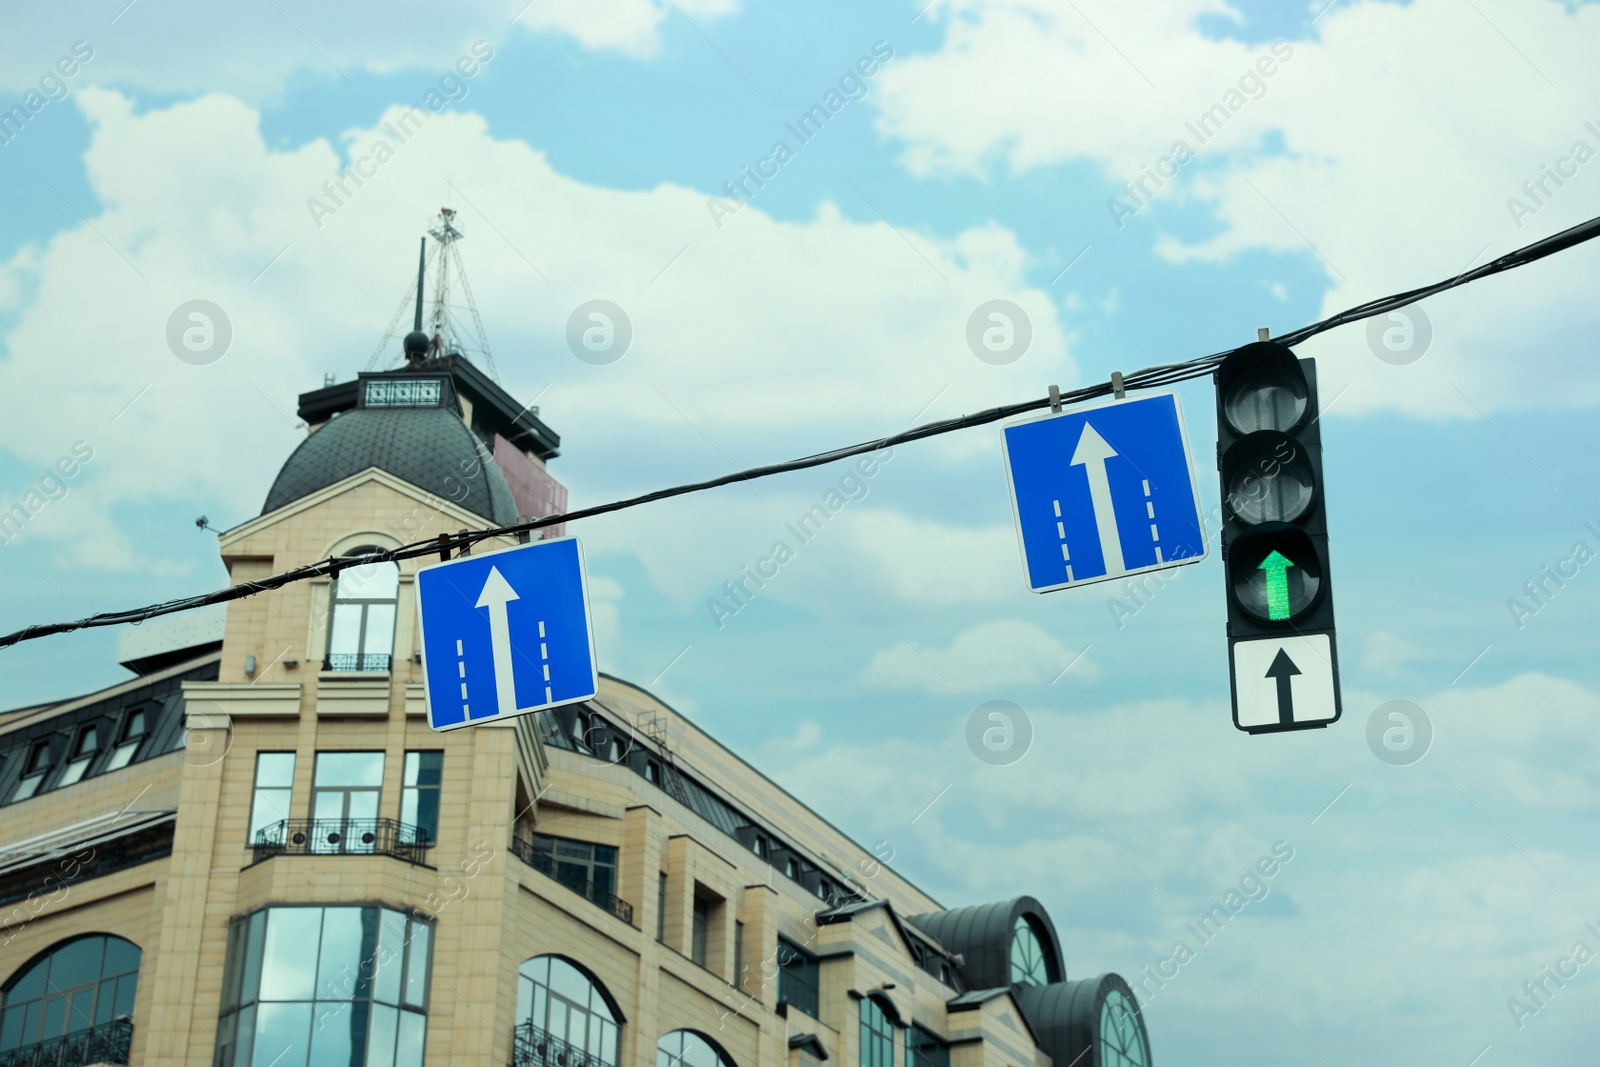 Photo of City street with traffic lights and road signs